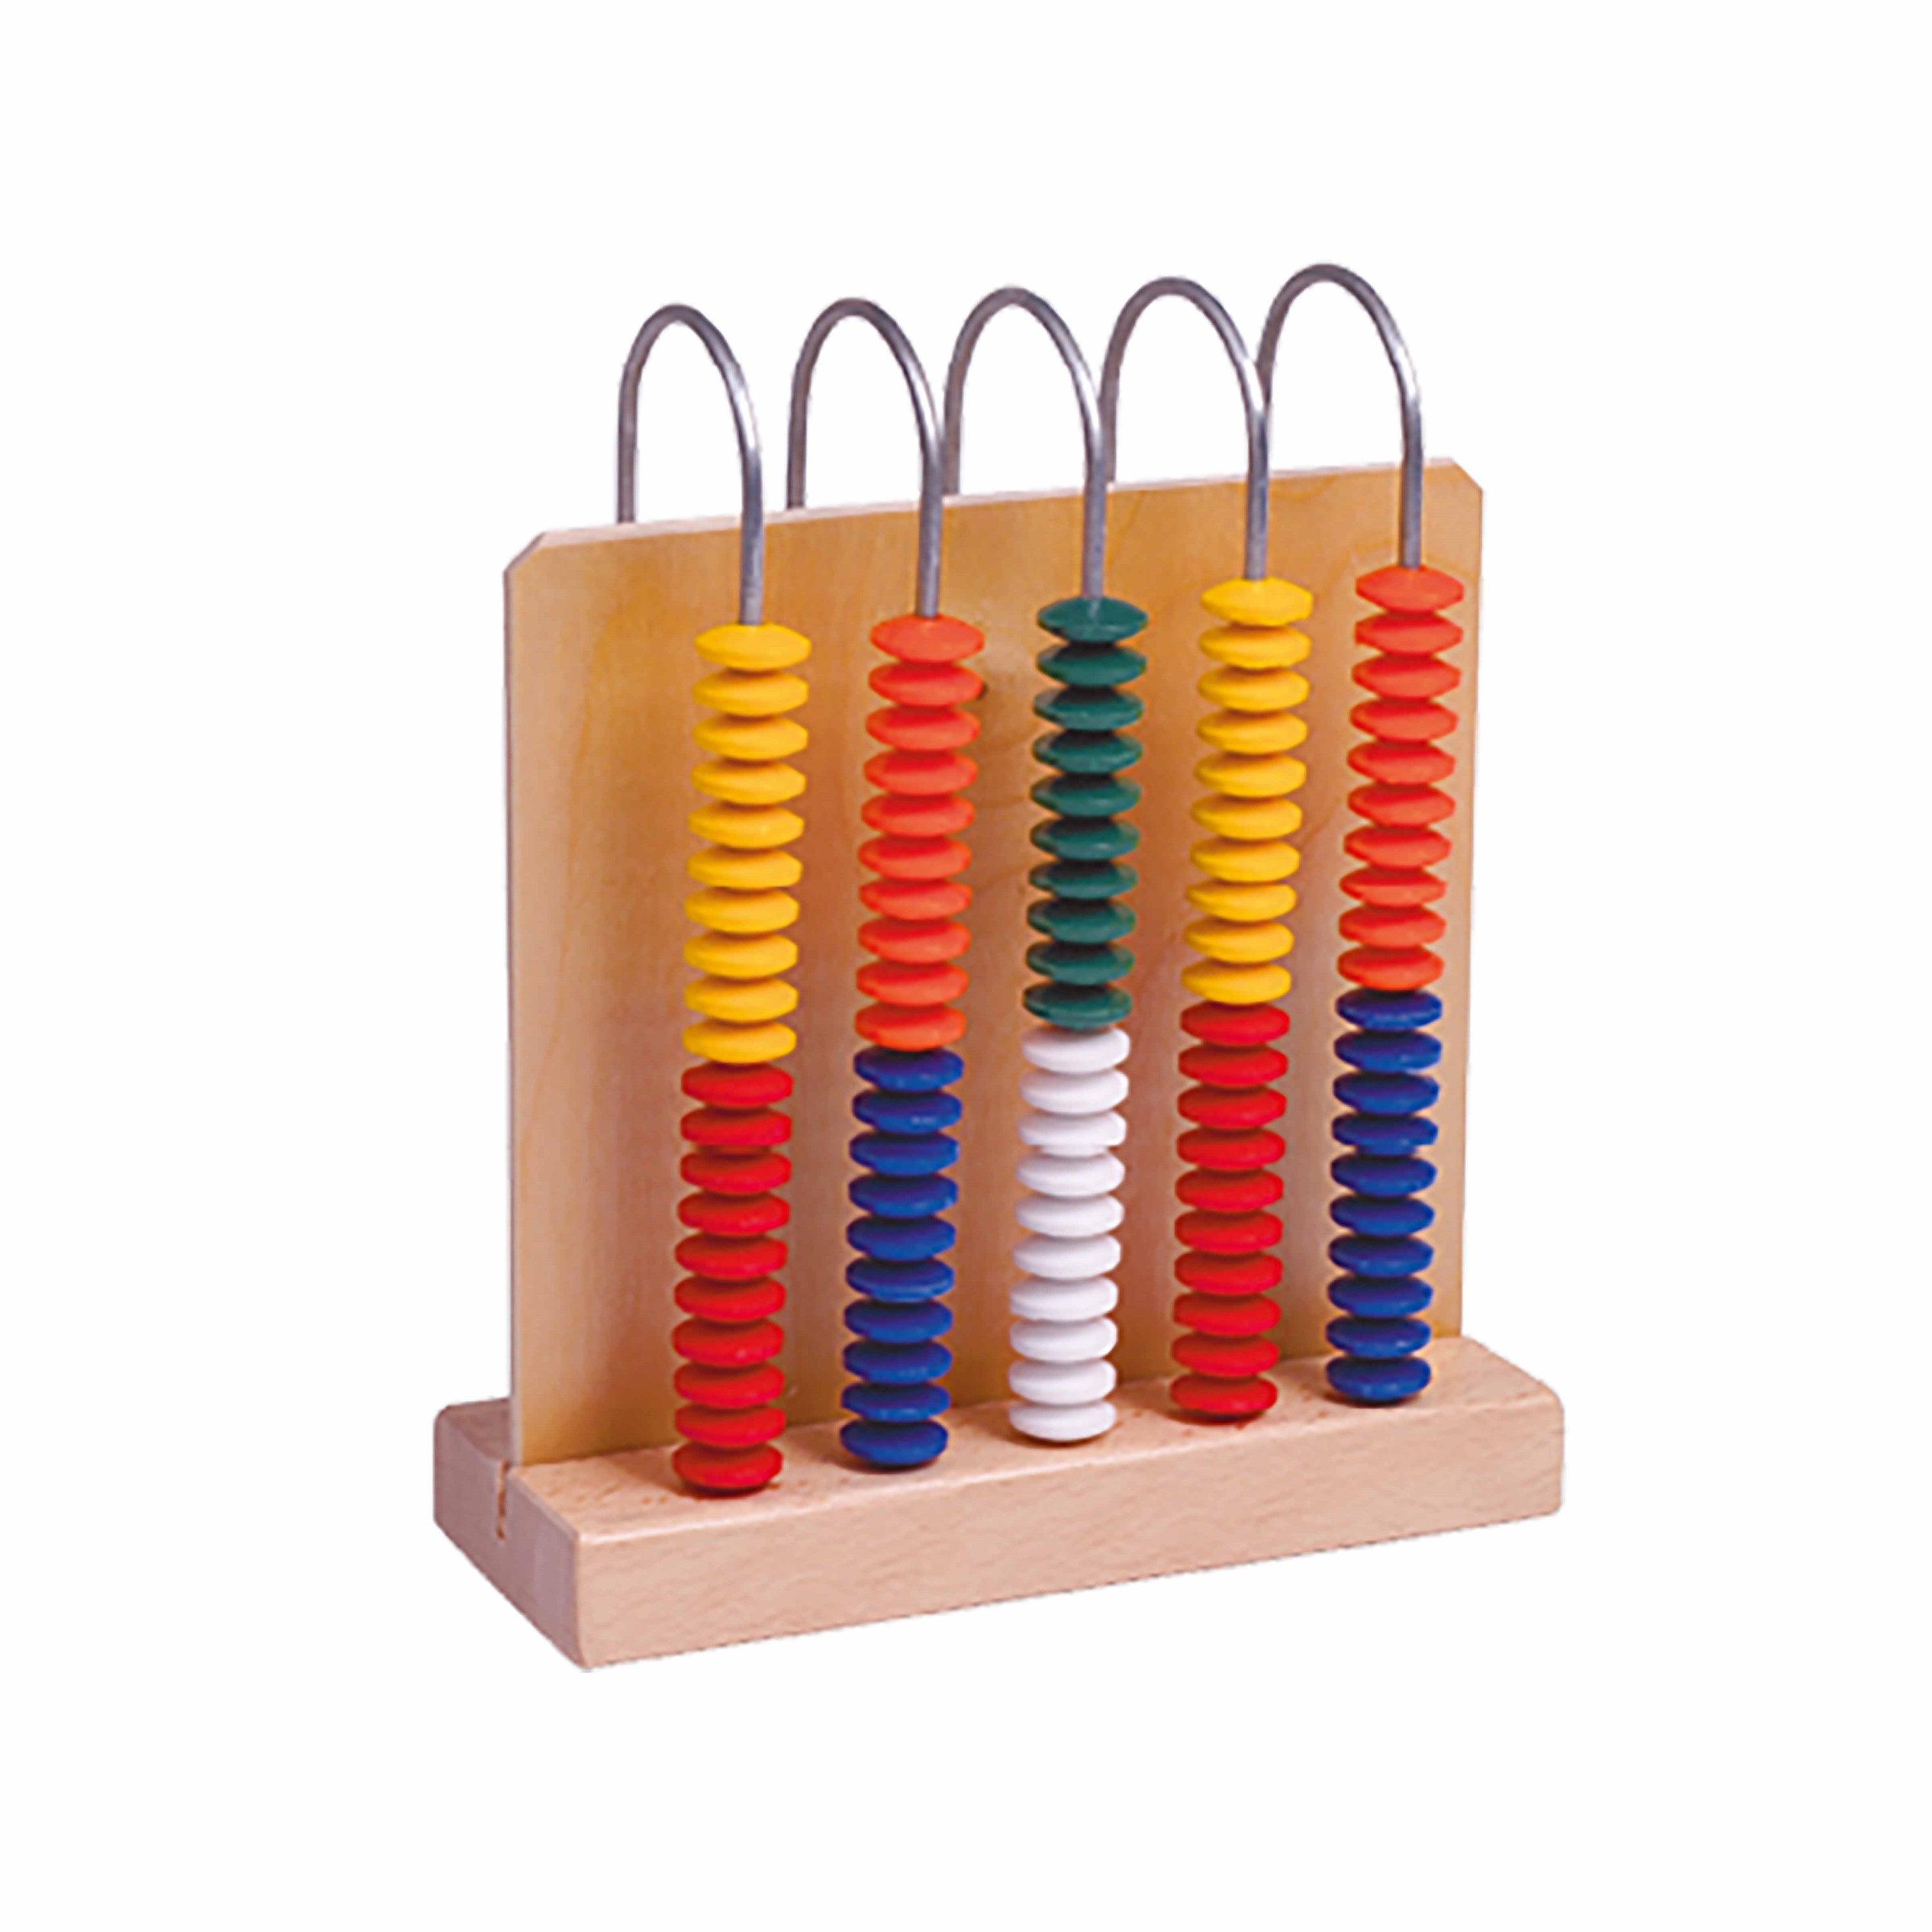 Educo: Abacus 5 x 20 oppilaat Abacus Math Aid